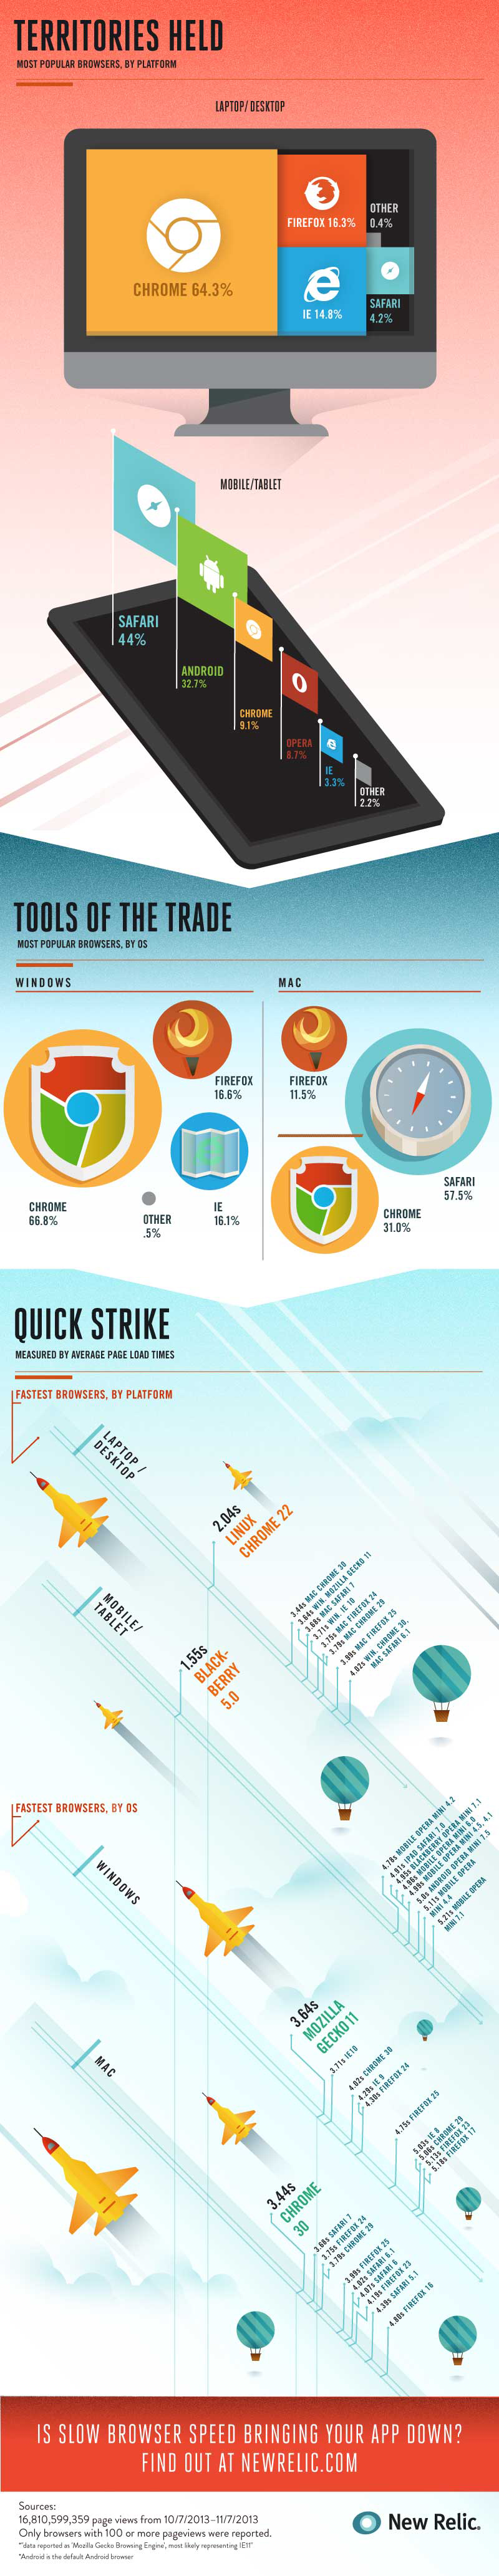 The Fastest Browsers By Platform [Infographic]